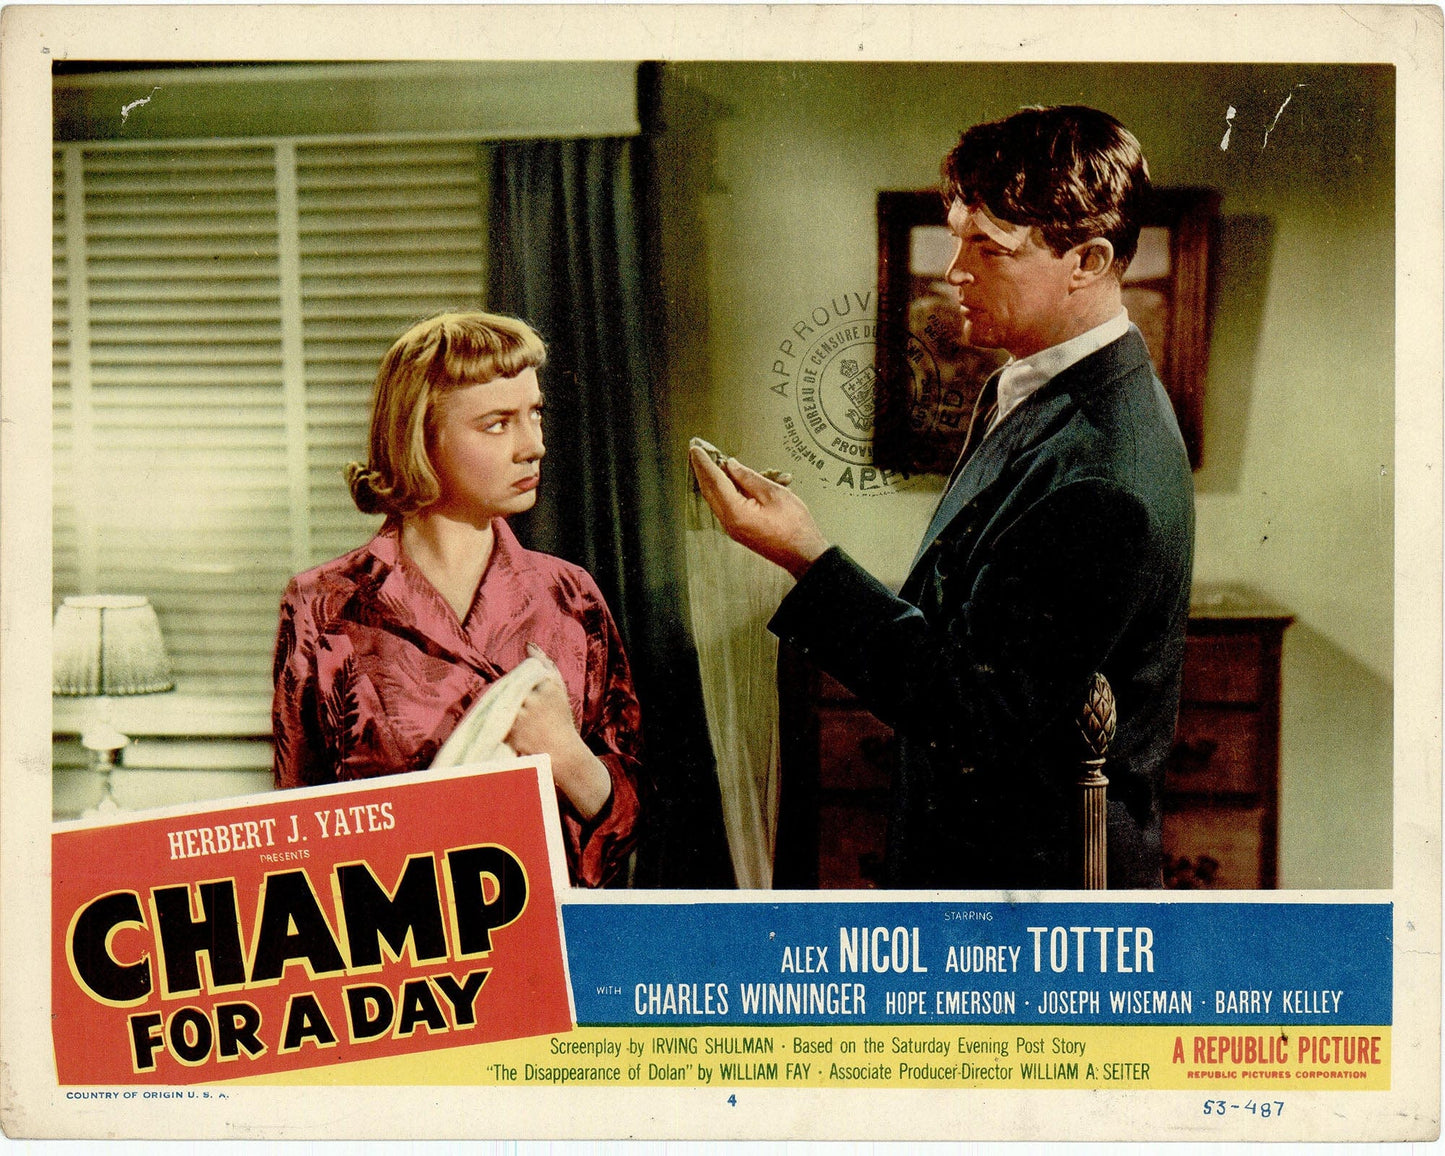 Champ for a Day - Movie Lobby Card